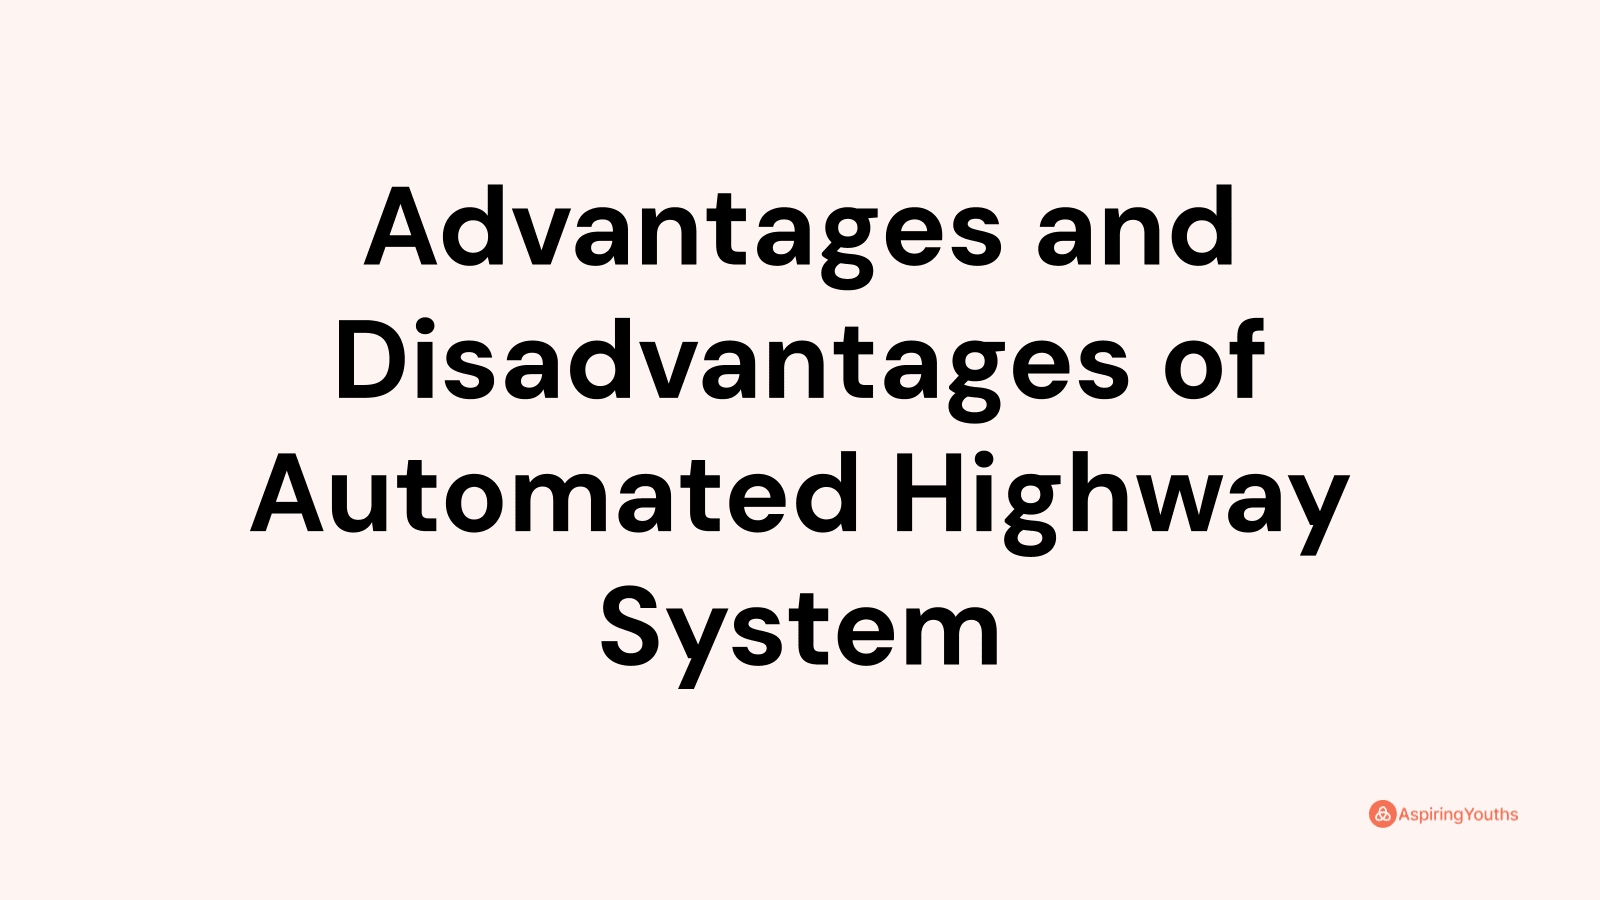 Advantages and disadvantages of Automated Highway System